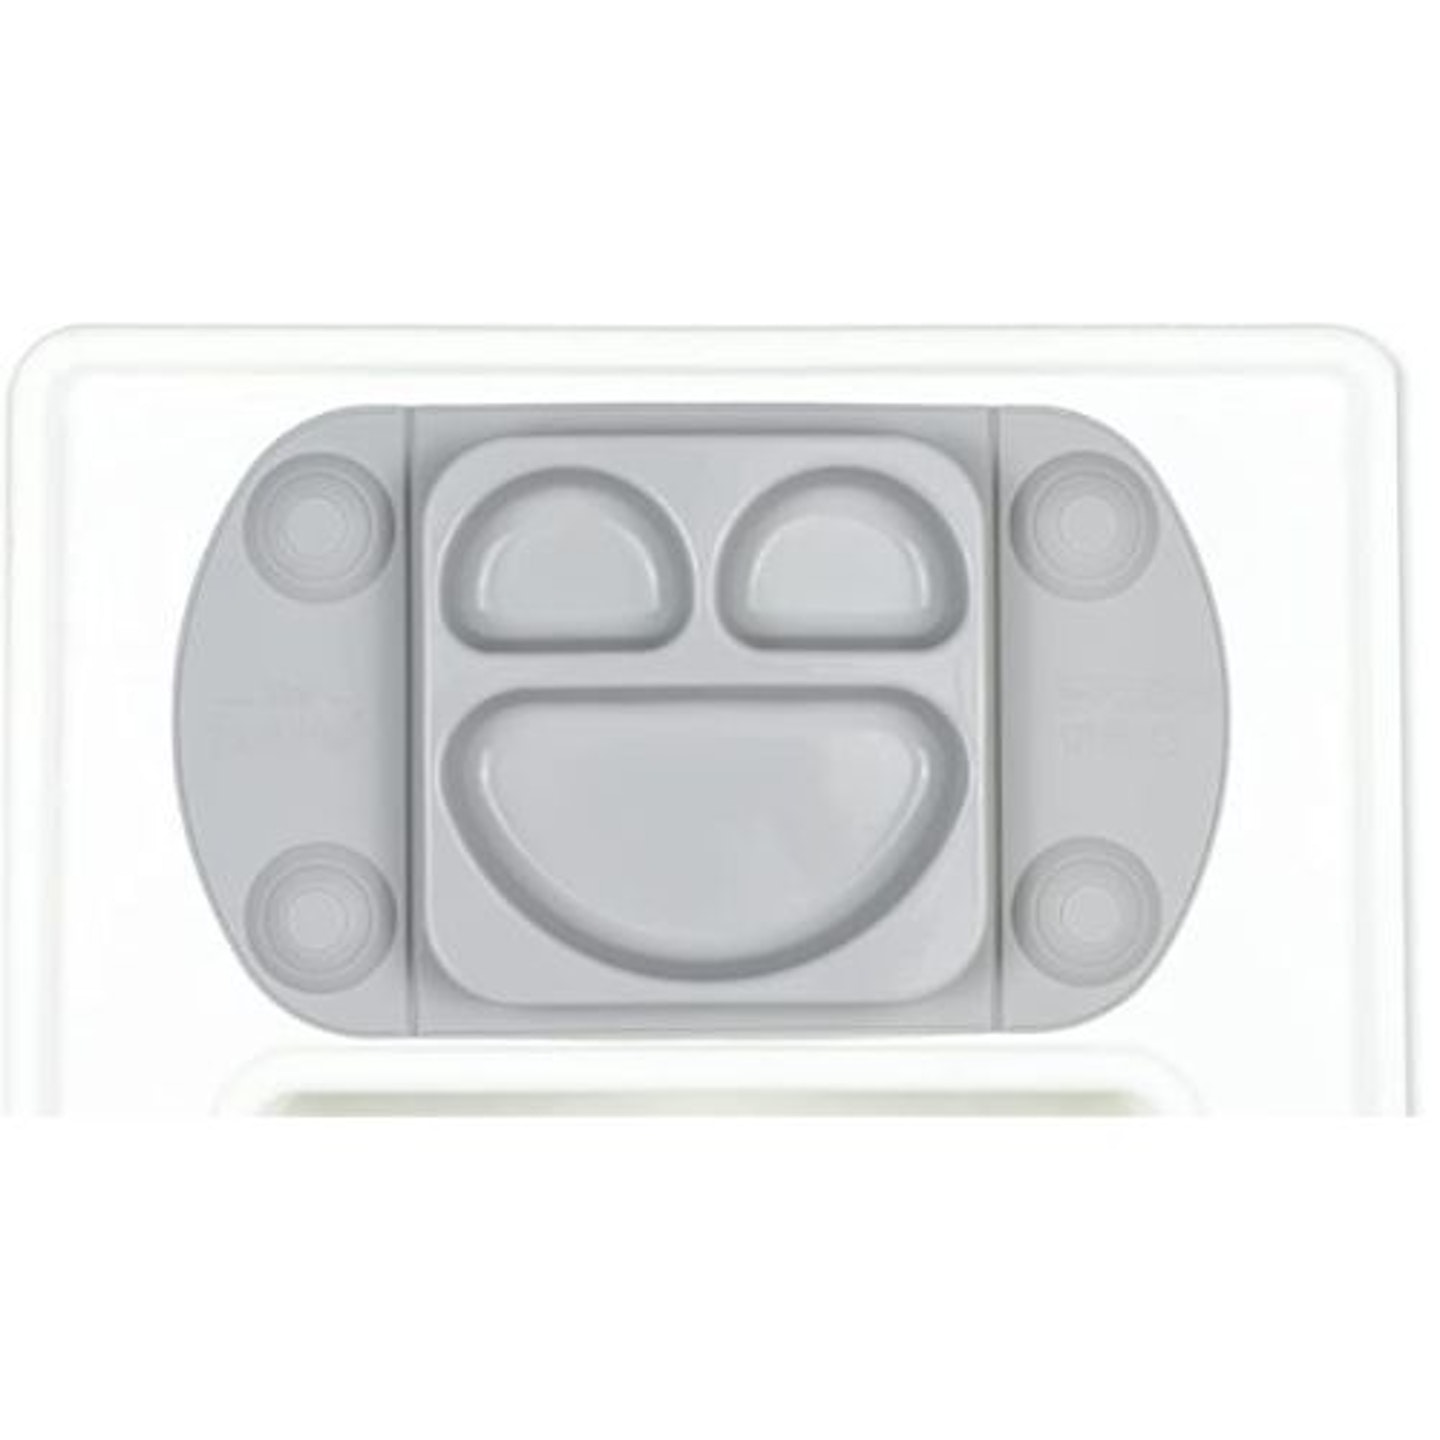 EasyMat Mini Portable Silicone Baby Suction Plate